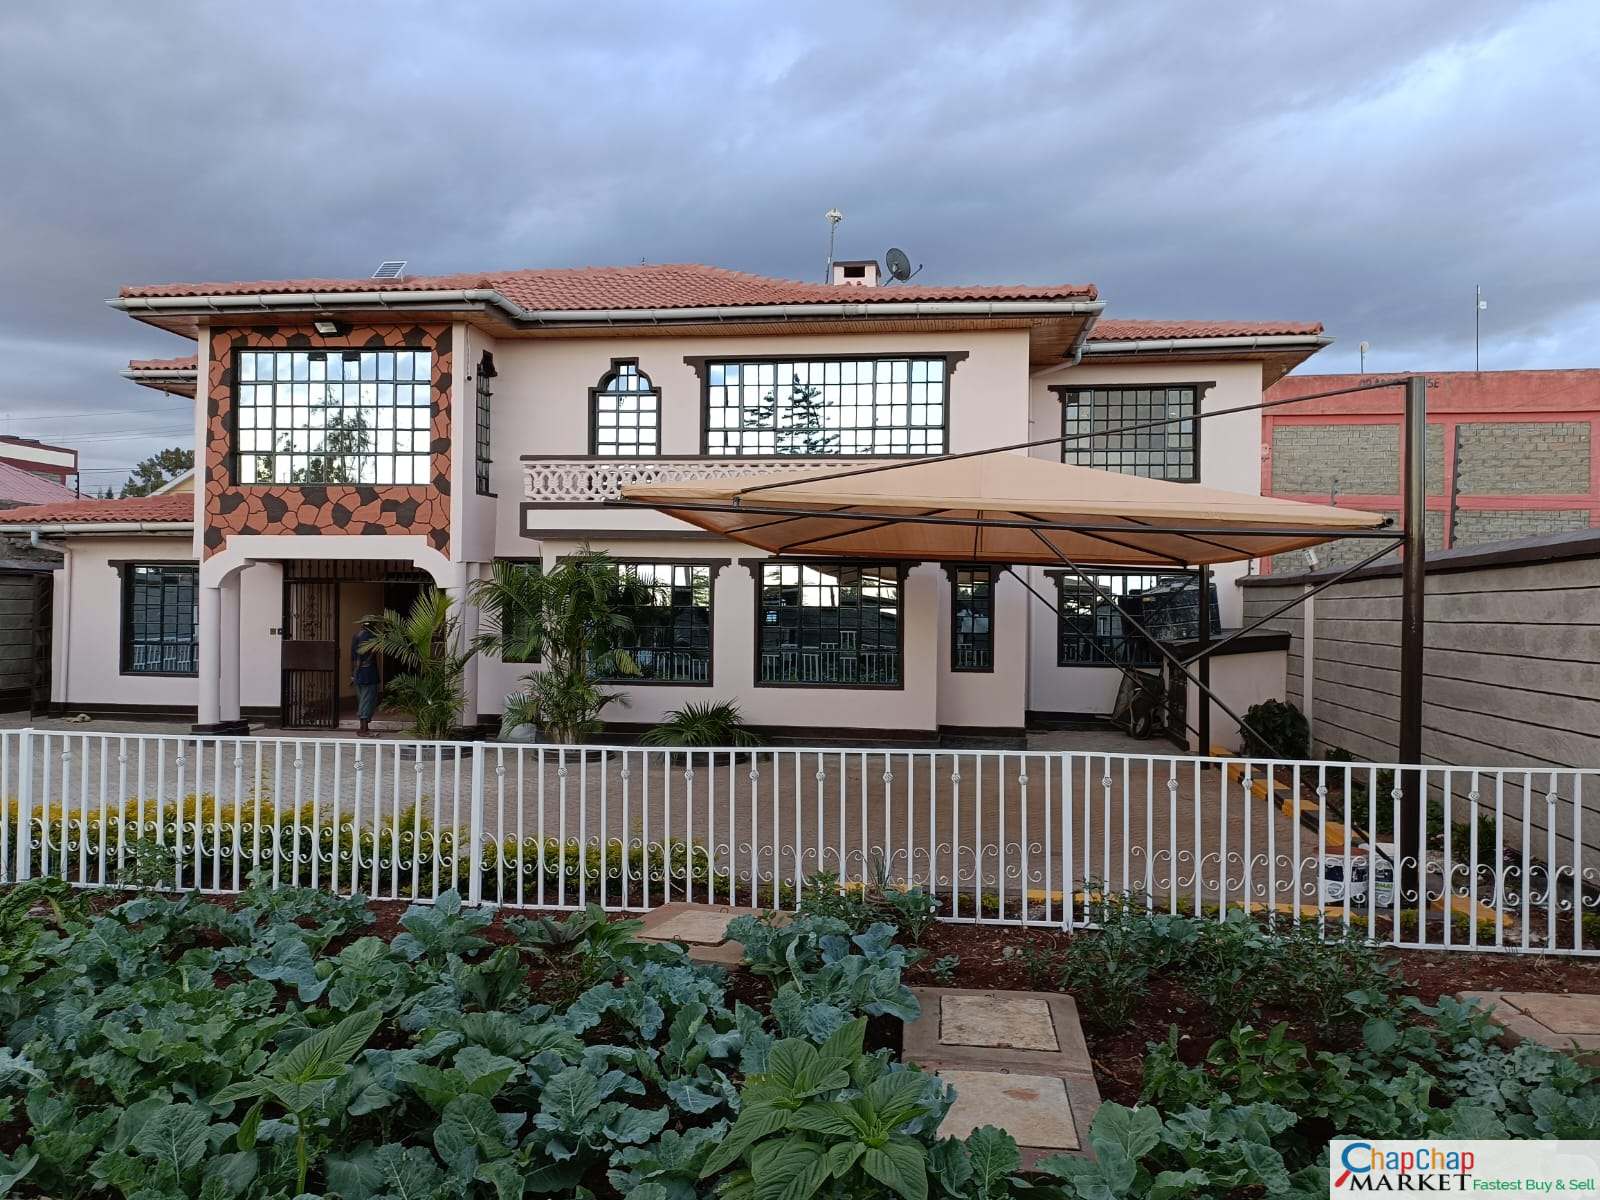 7 bedroom all ensuite Mansion for sale in Acacia kitengela with SQ gym CCTV Garden etc House 7 bedrooms